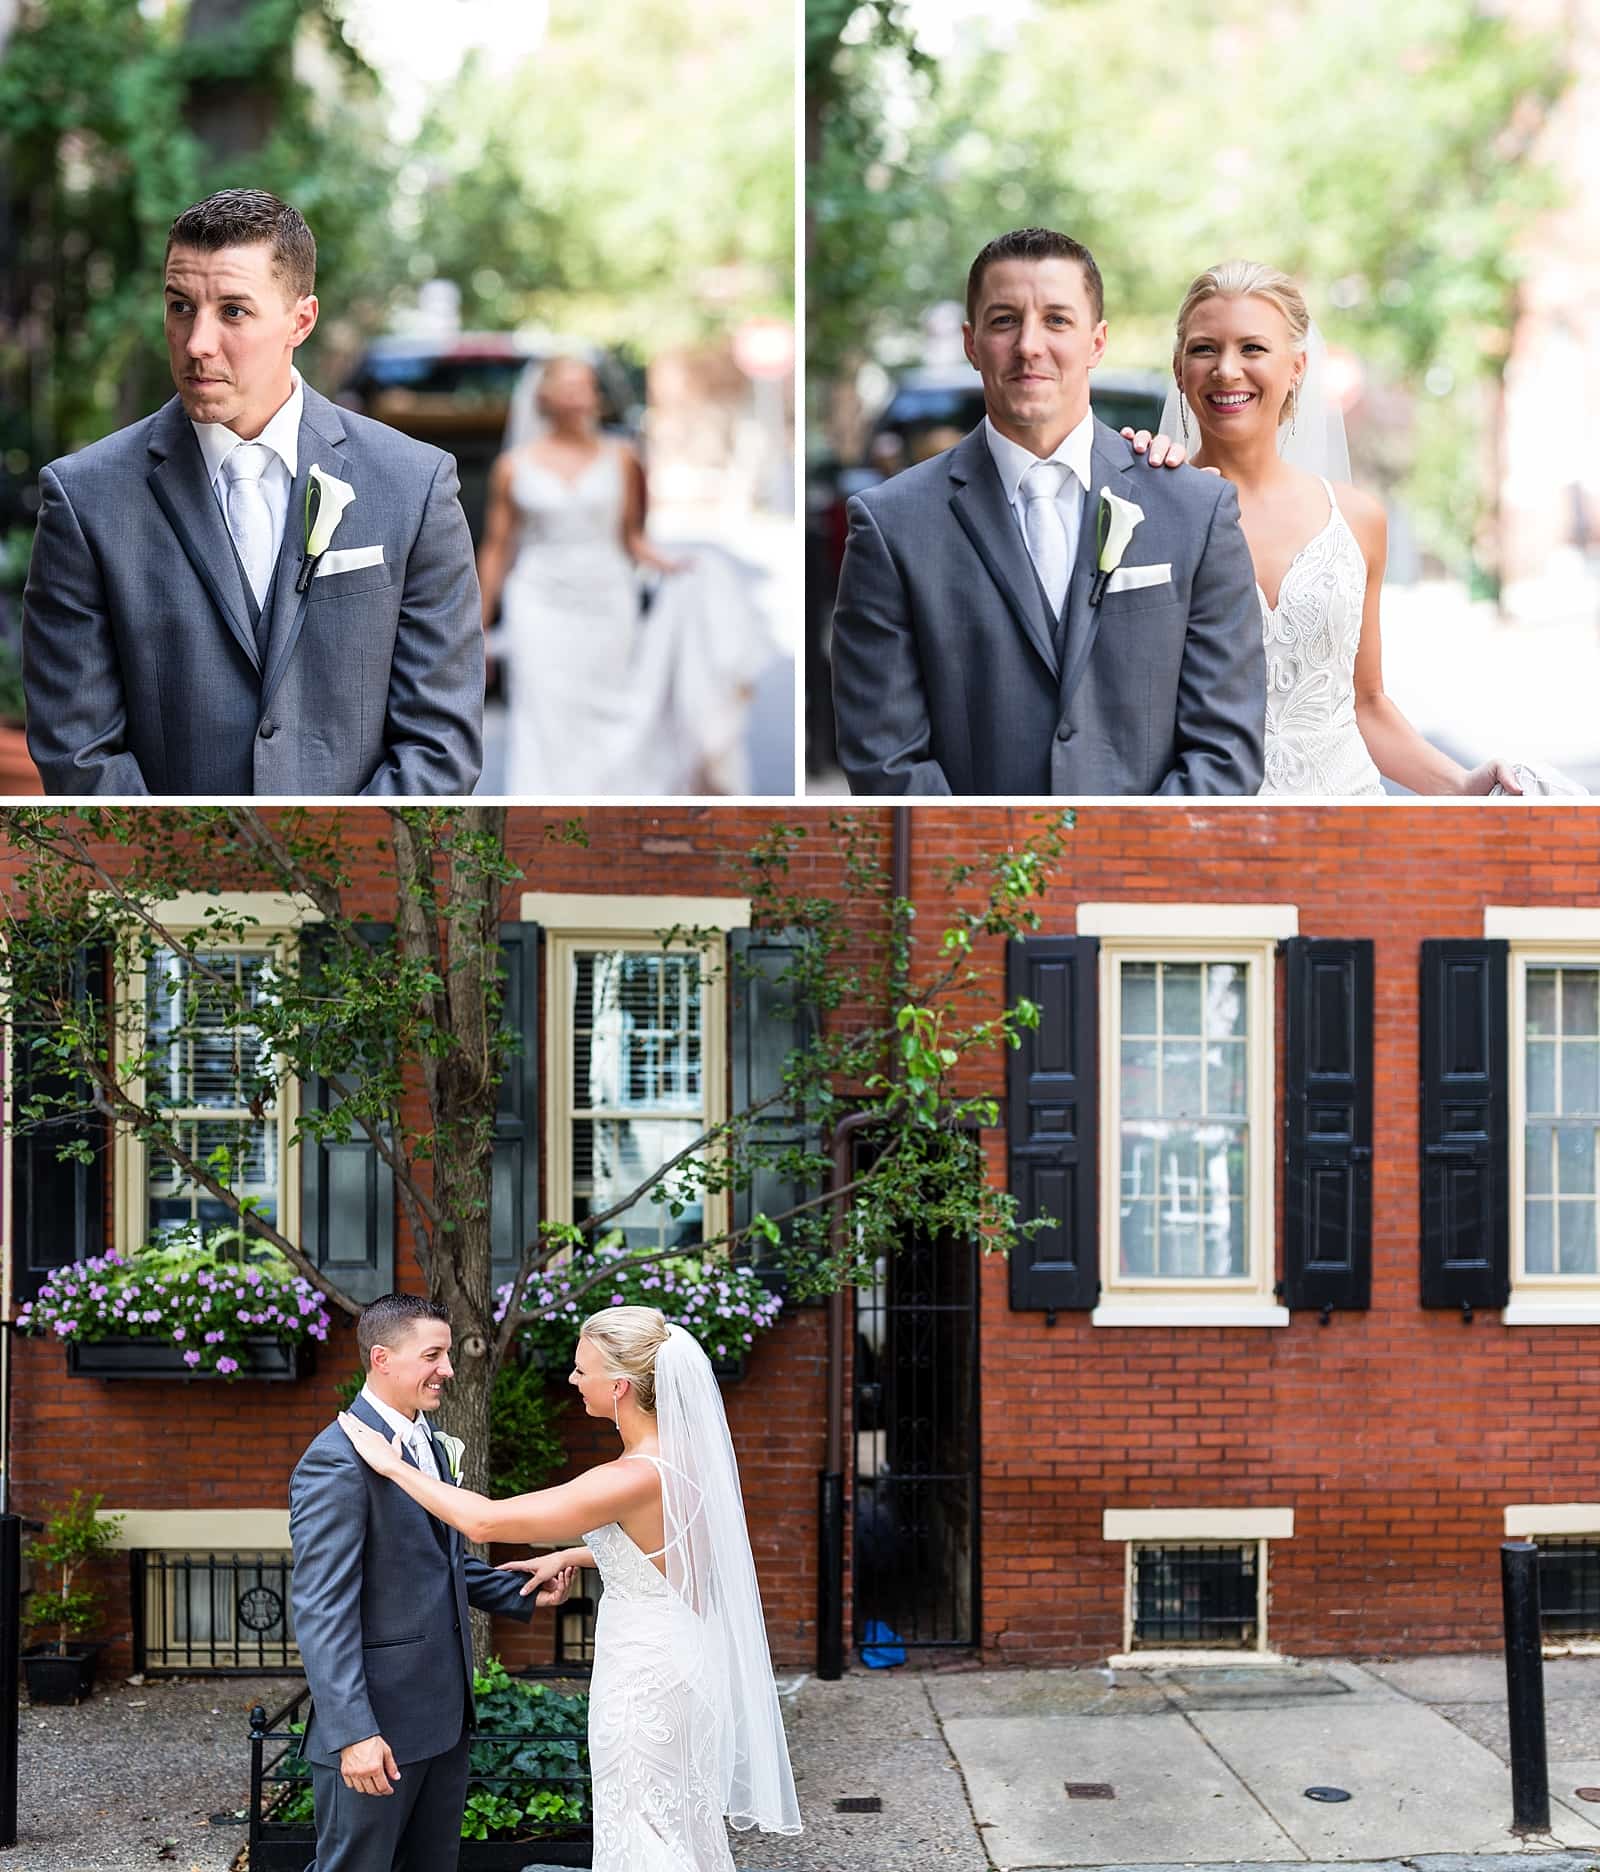 Smedley Street, philadelphia streets, first look, bride and groom, getting ready, wedding day